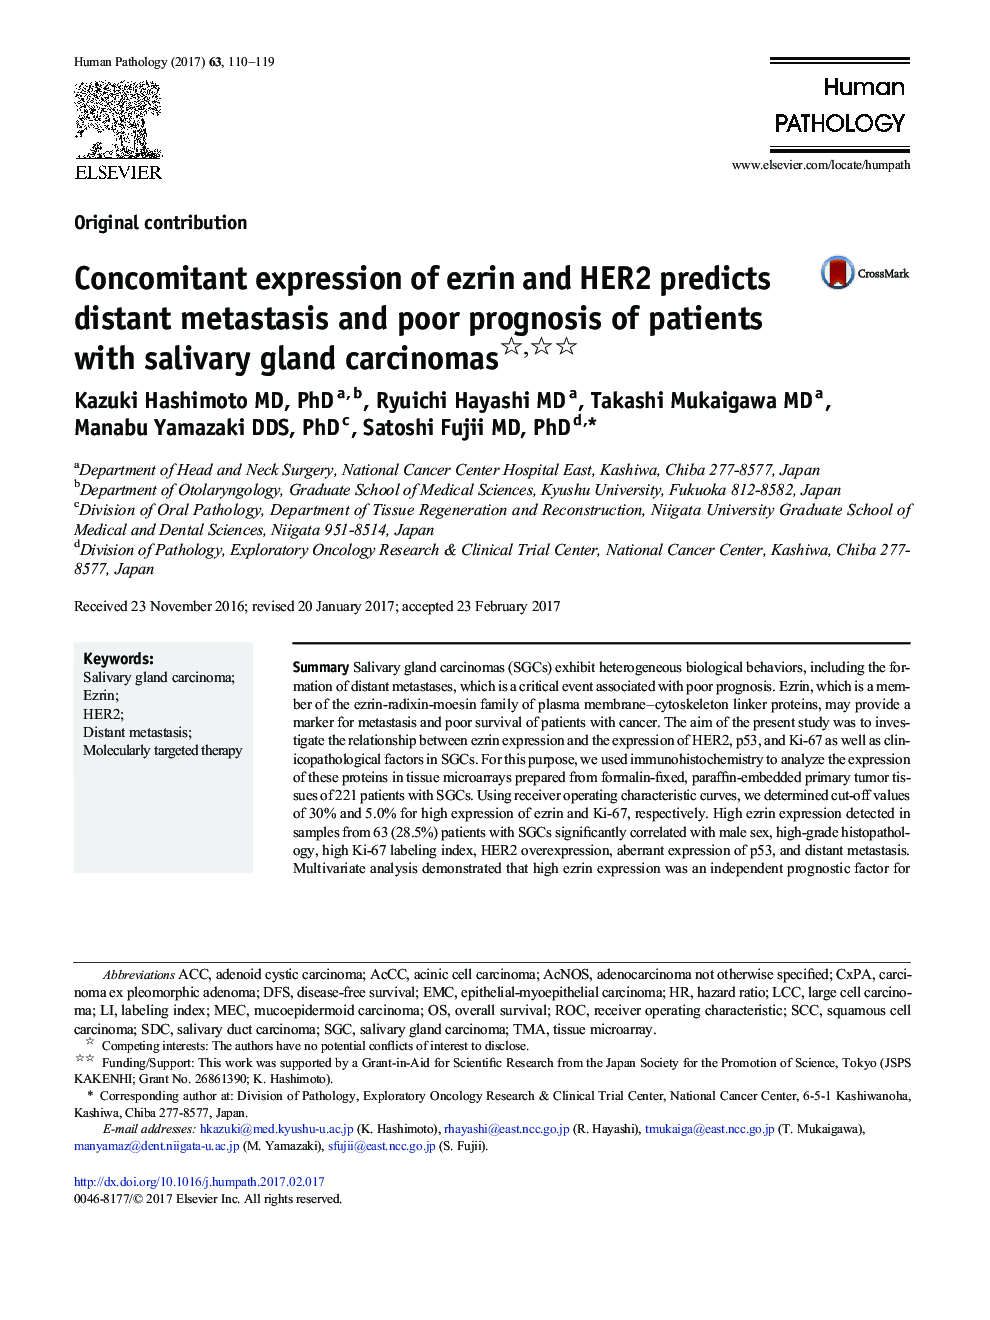 Original contributionConcomitant expression of ezrin and HER2 predicts distant metastasis and poor prognosis of patients with salivary gland carcinomas